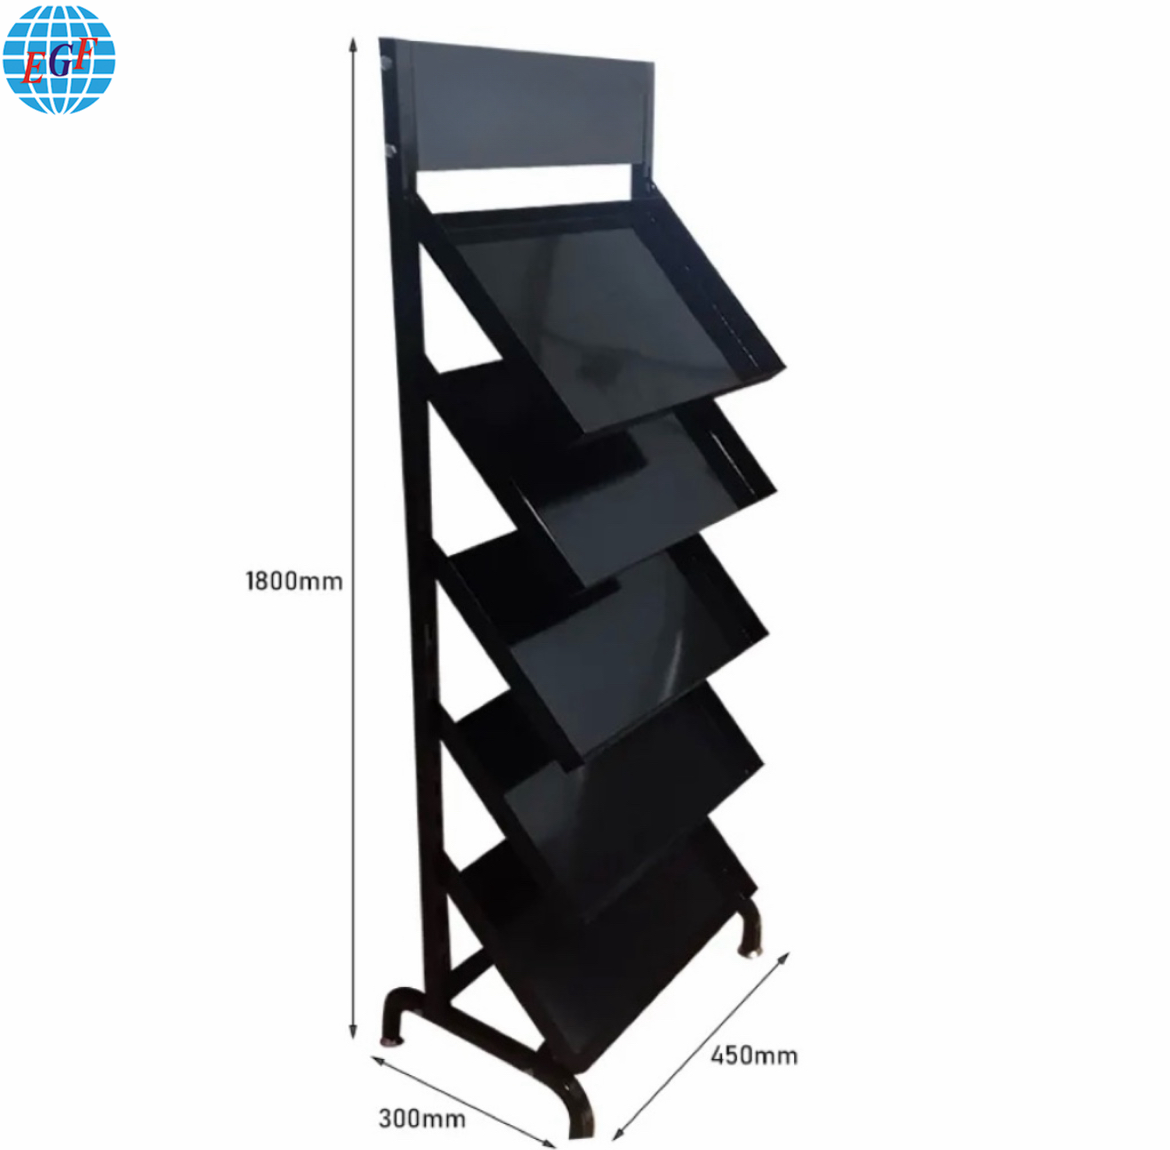 Custom Ceramic Tile Marble Display Stand Made of Black Metal Material with Brochure Display Stand